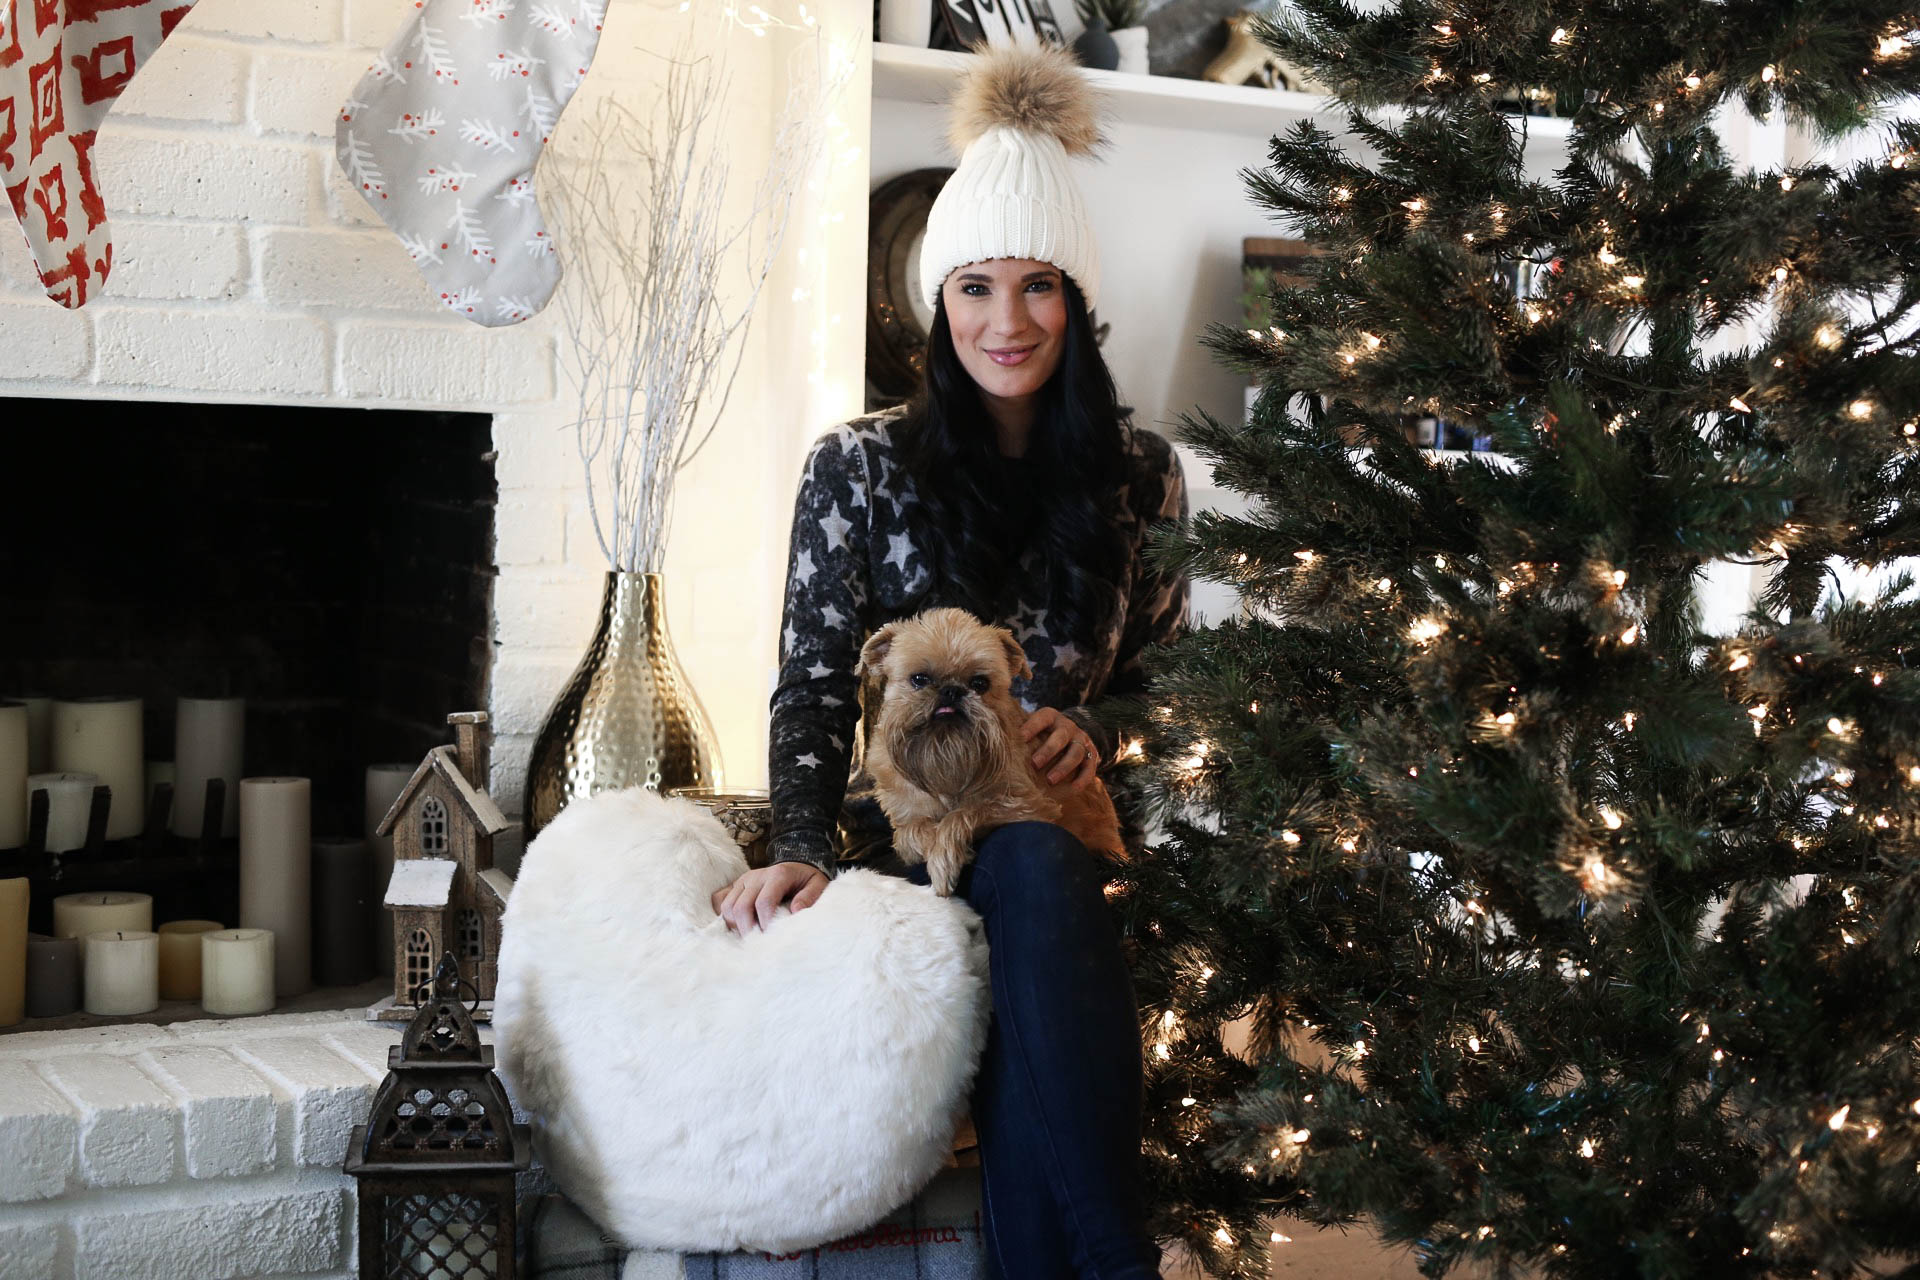 How I'm Giving Back This Holiday Season & Beyond | 7 Creative Ideas | holiday giving tips | ways to give back during the holidays || Dressed to Kill #givingseason #holidaygiving #giveback - 7 Ways to Give Back During the Holidays by popular Austin blogger Dressed to Kill